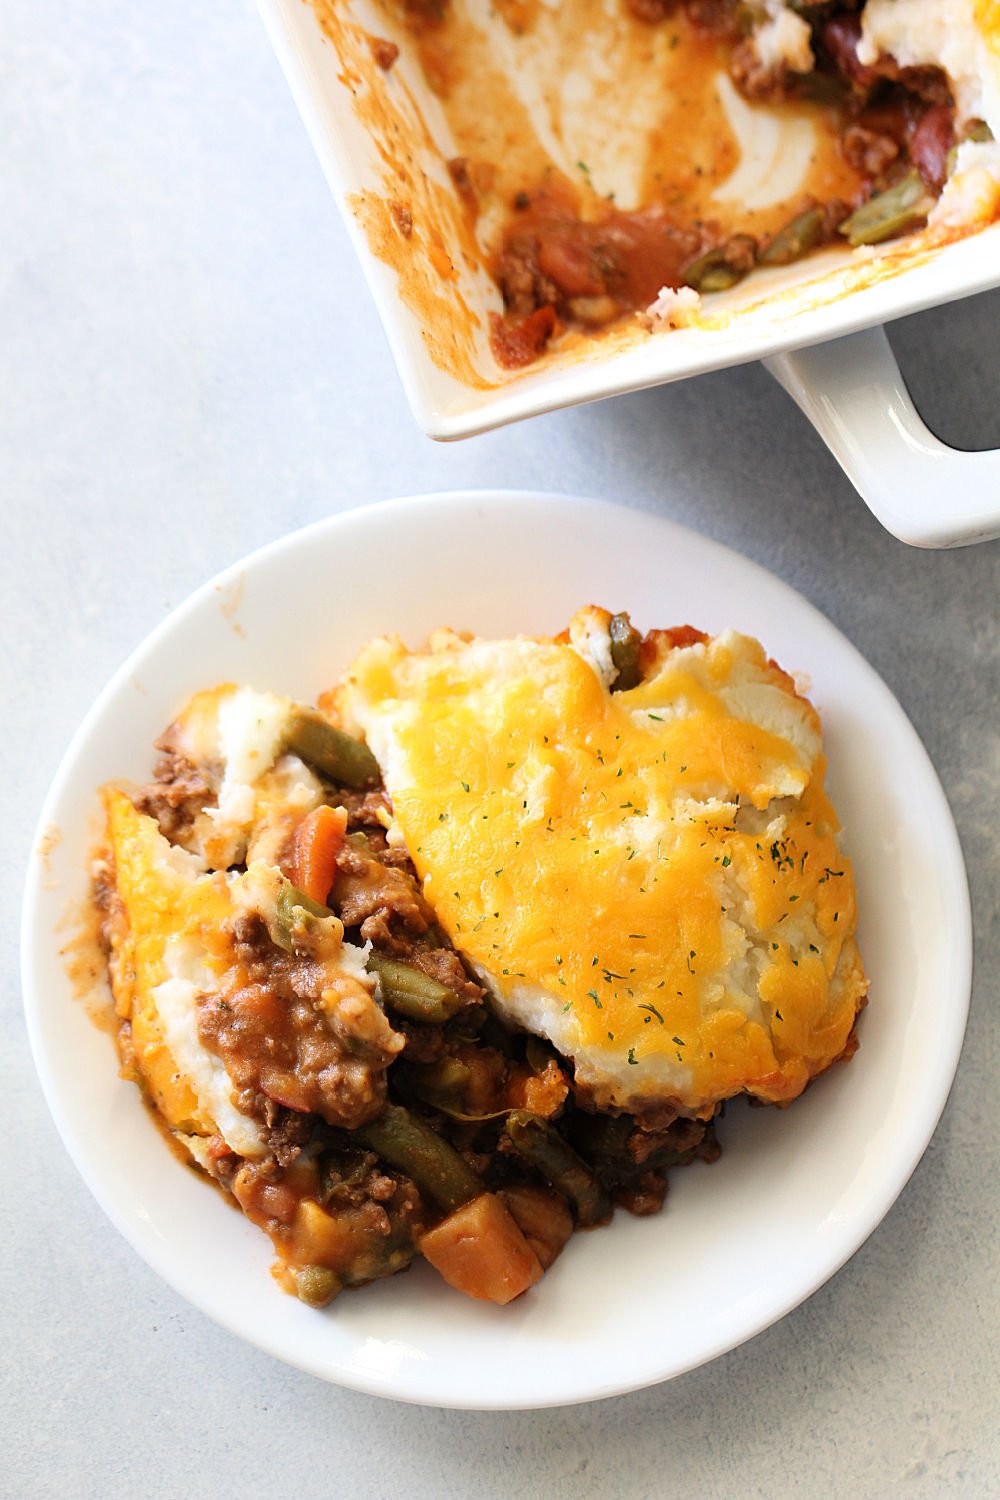 https://www.sixsistersstuff.com/recipe/quick-and-easy-shepherds-pie/